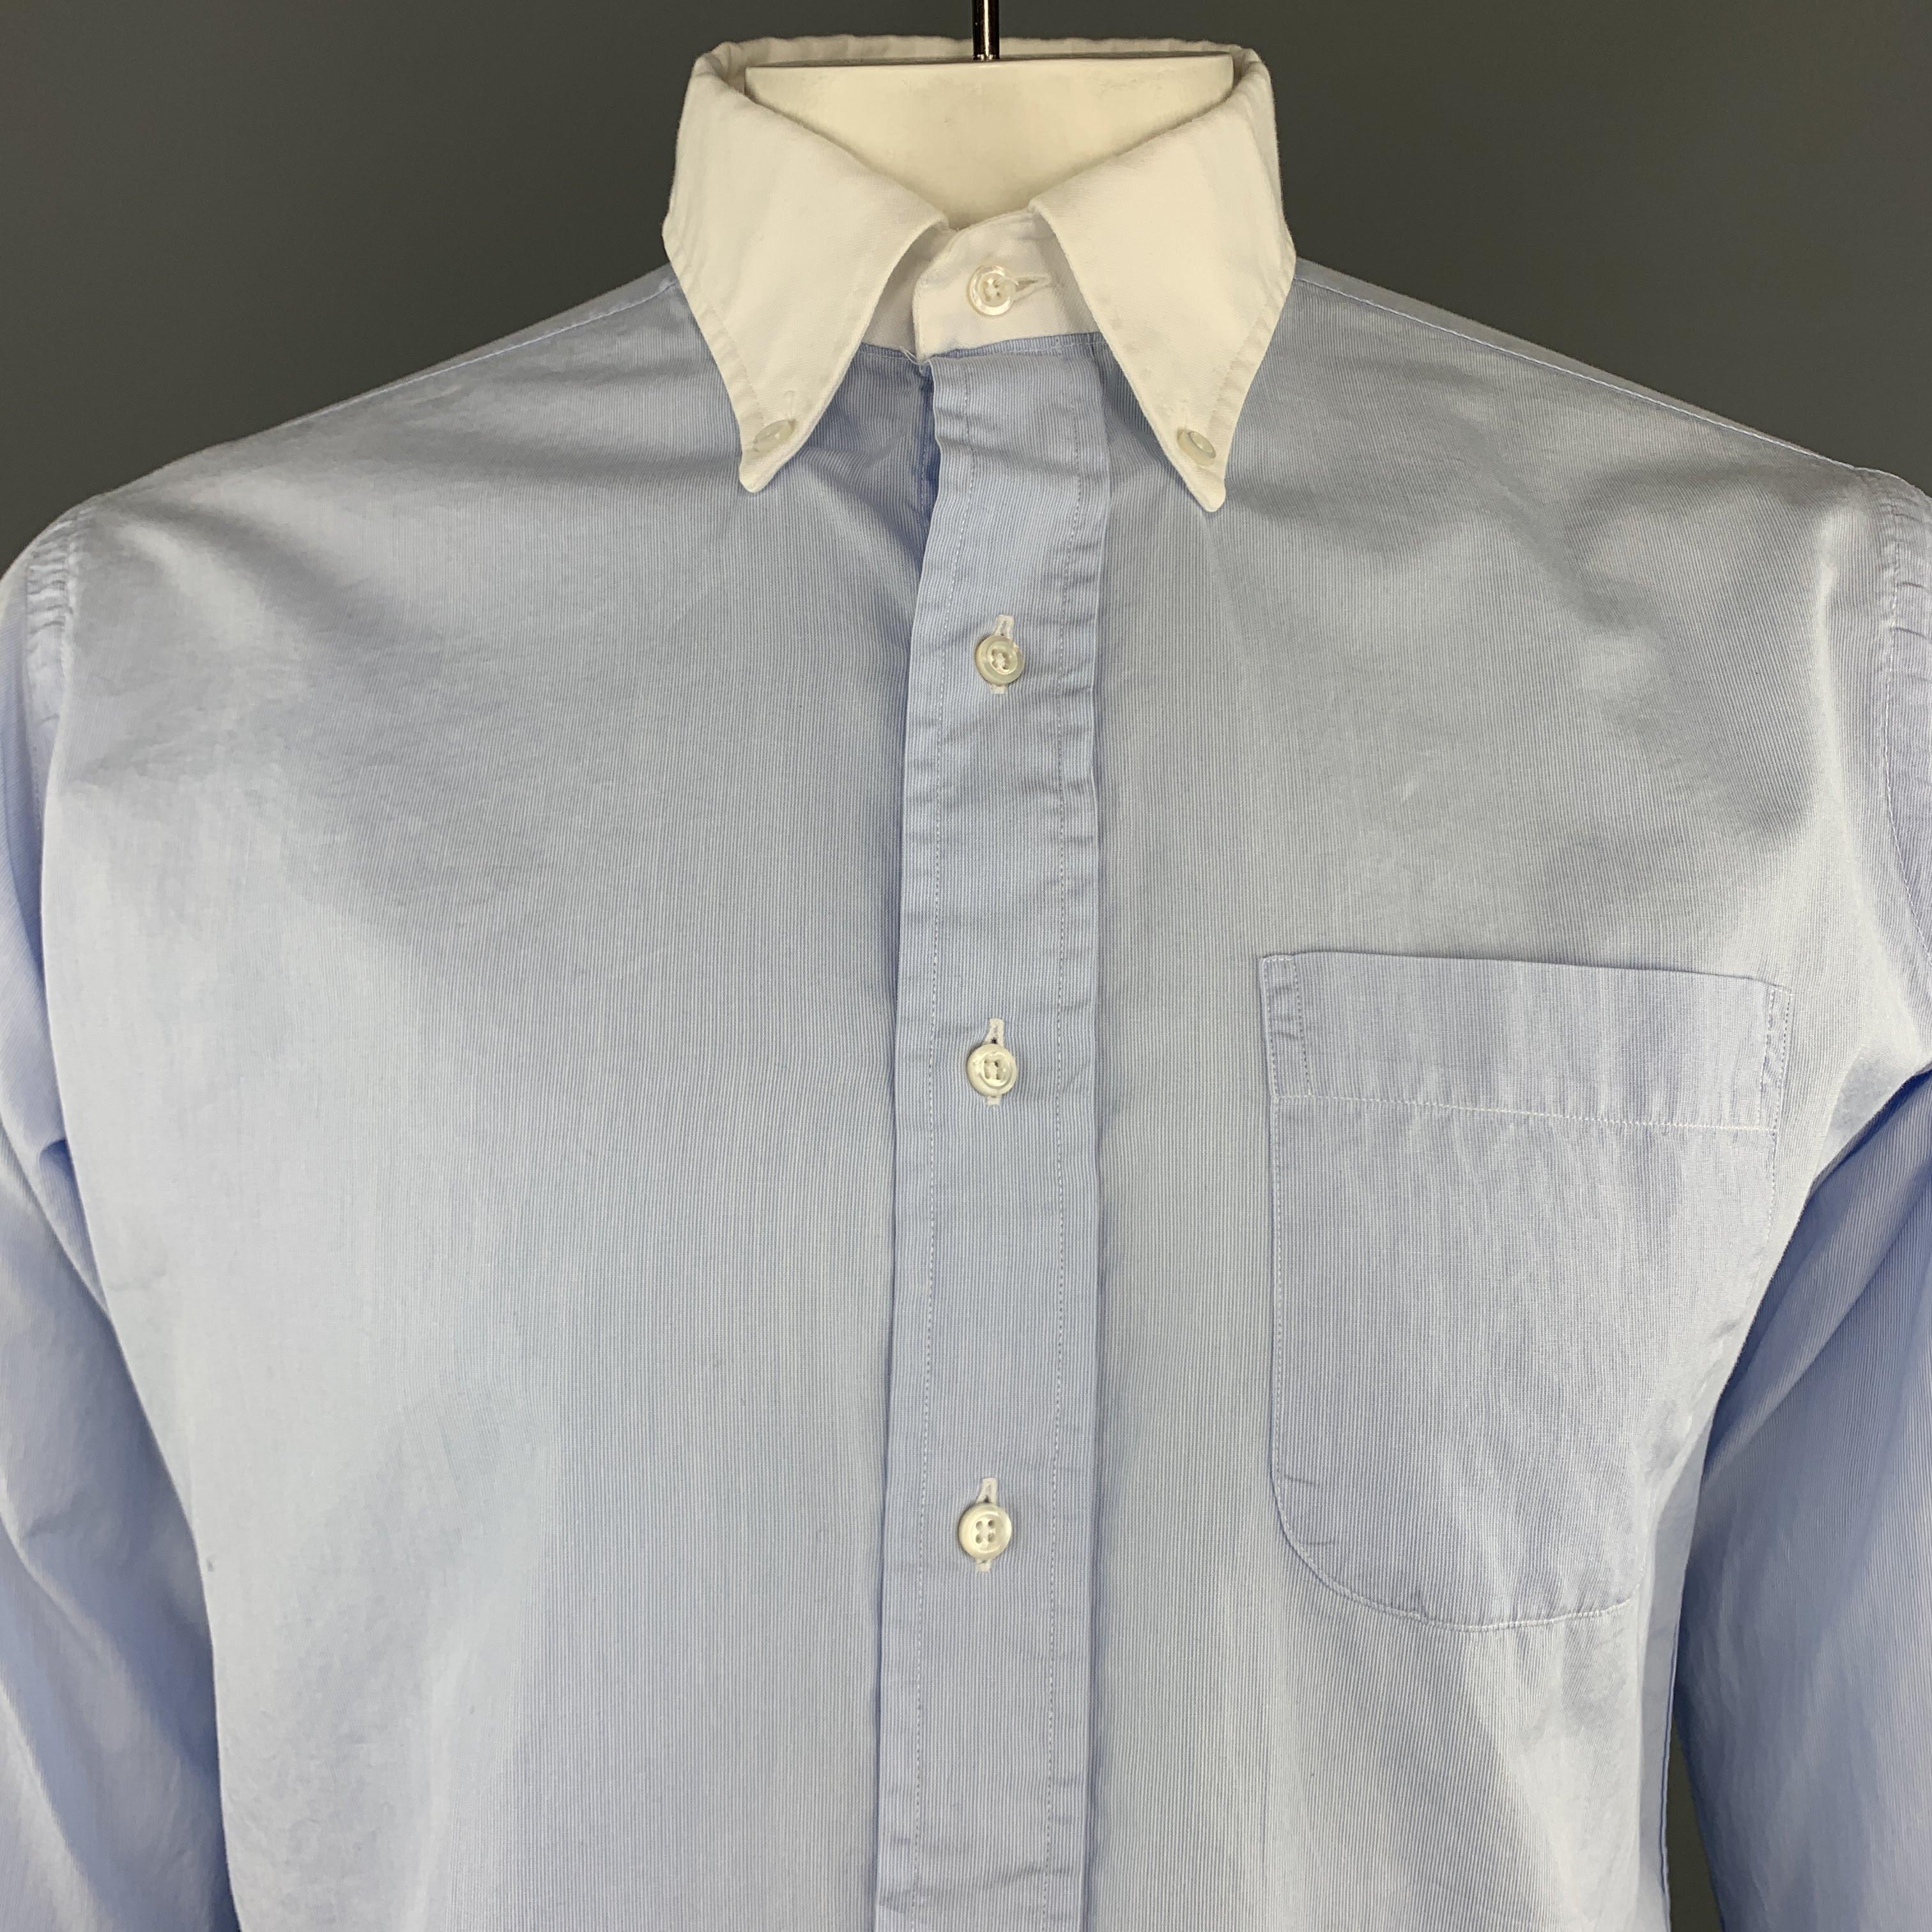 THOM BROWNE long sleeve shirt comes in a light blue cotton featuring a button down style, french cuffs, and a front patch pocket. Made in USA.
 
Excellent Pre-Owned Condition.
Marked: (No size)
 
Measurements:
 
Shoulder: 18 in.
Chest: 47